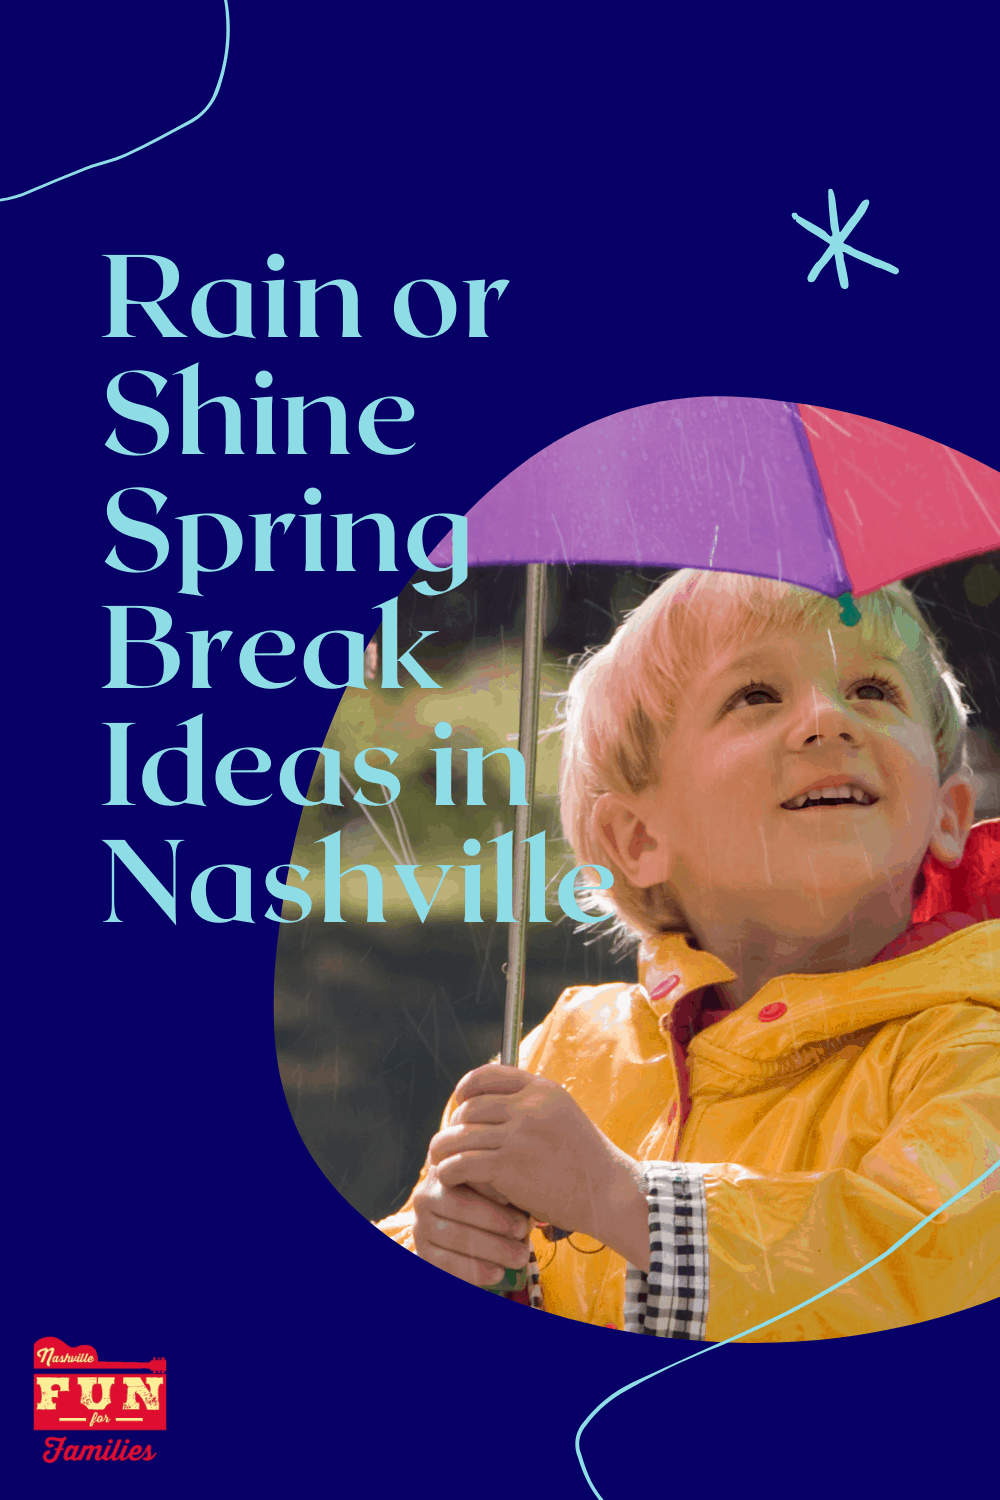 10 Things to do on Spring Break in Nashville and Middle Tennessee